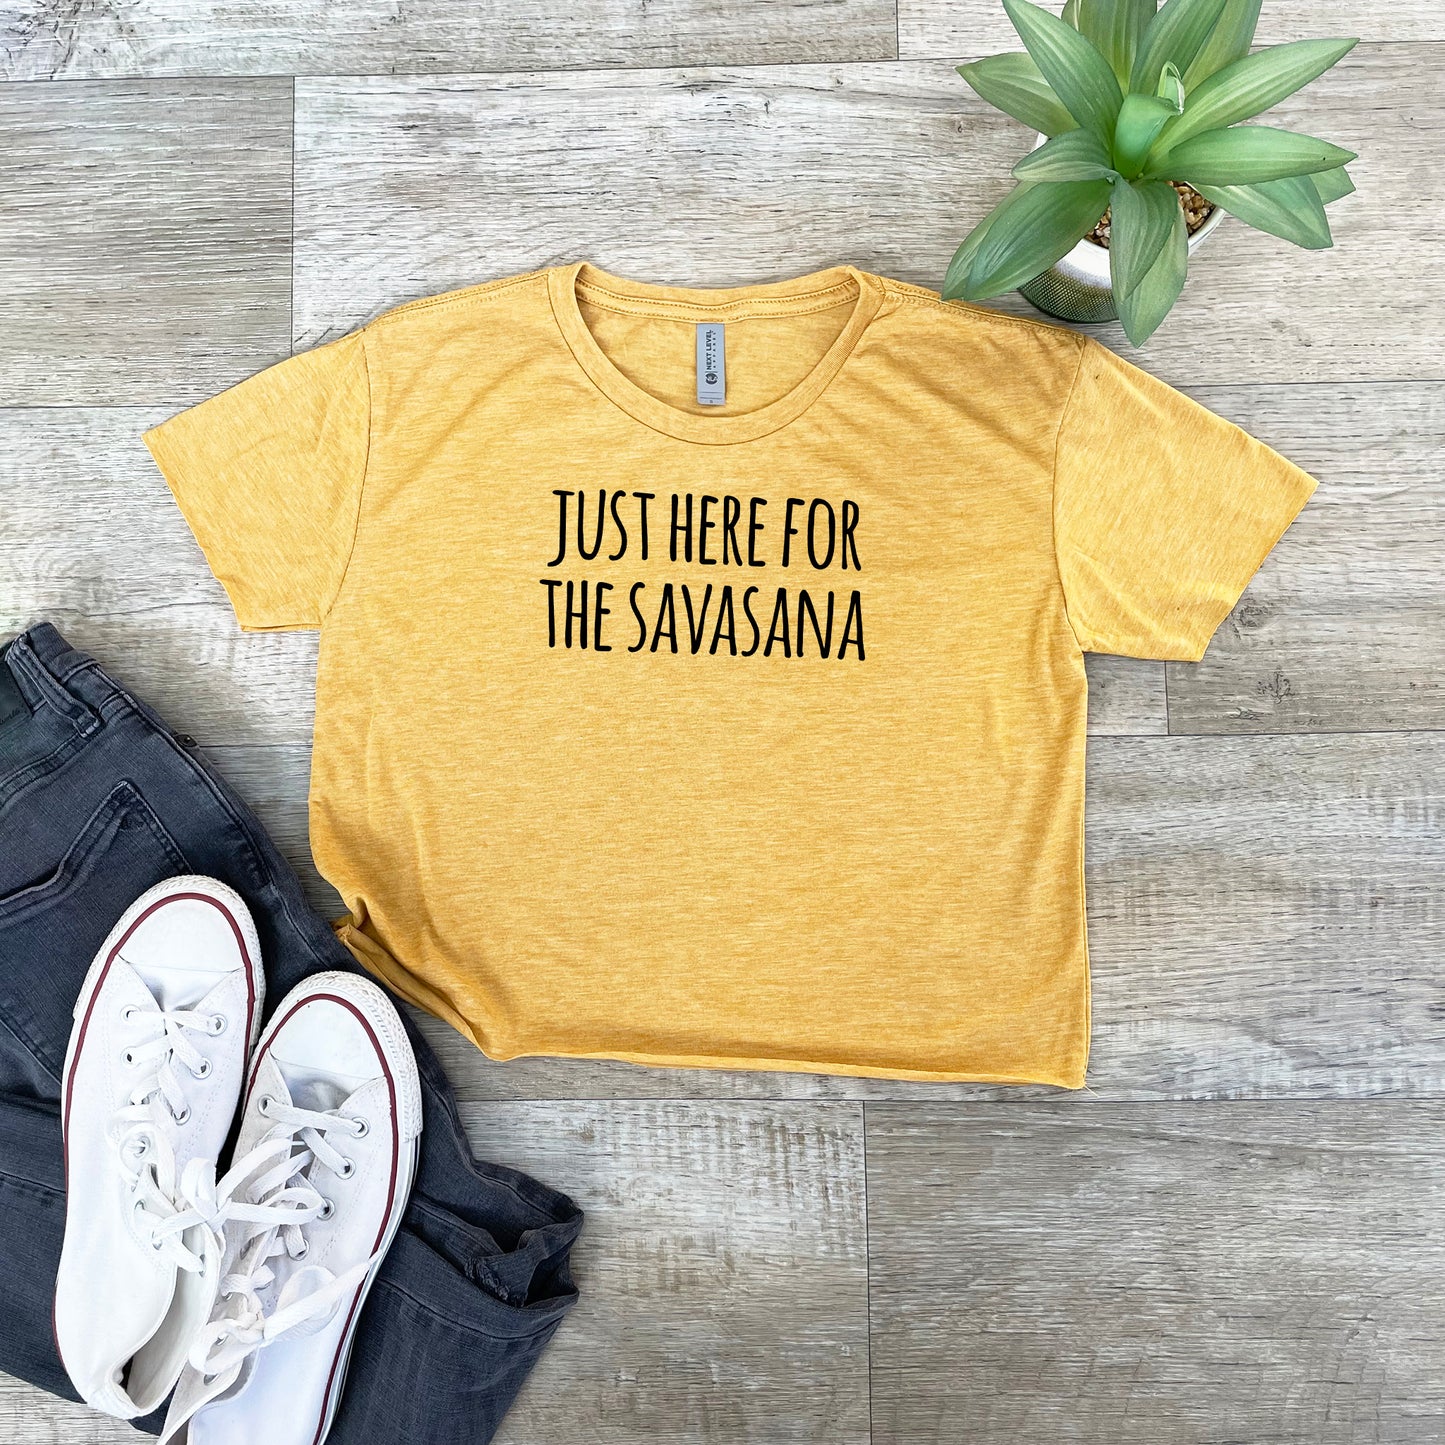 Just Here For The Savasana (Yoga) - Women's Crop Tee - Heather Gray or Gold